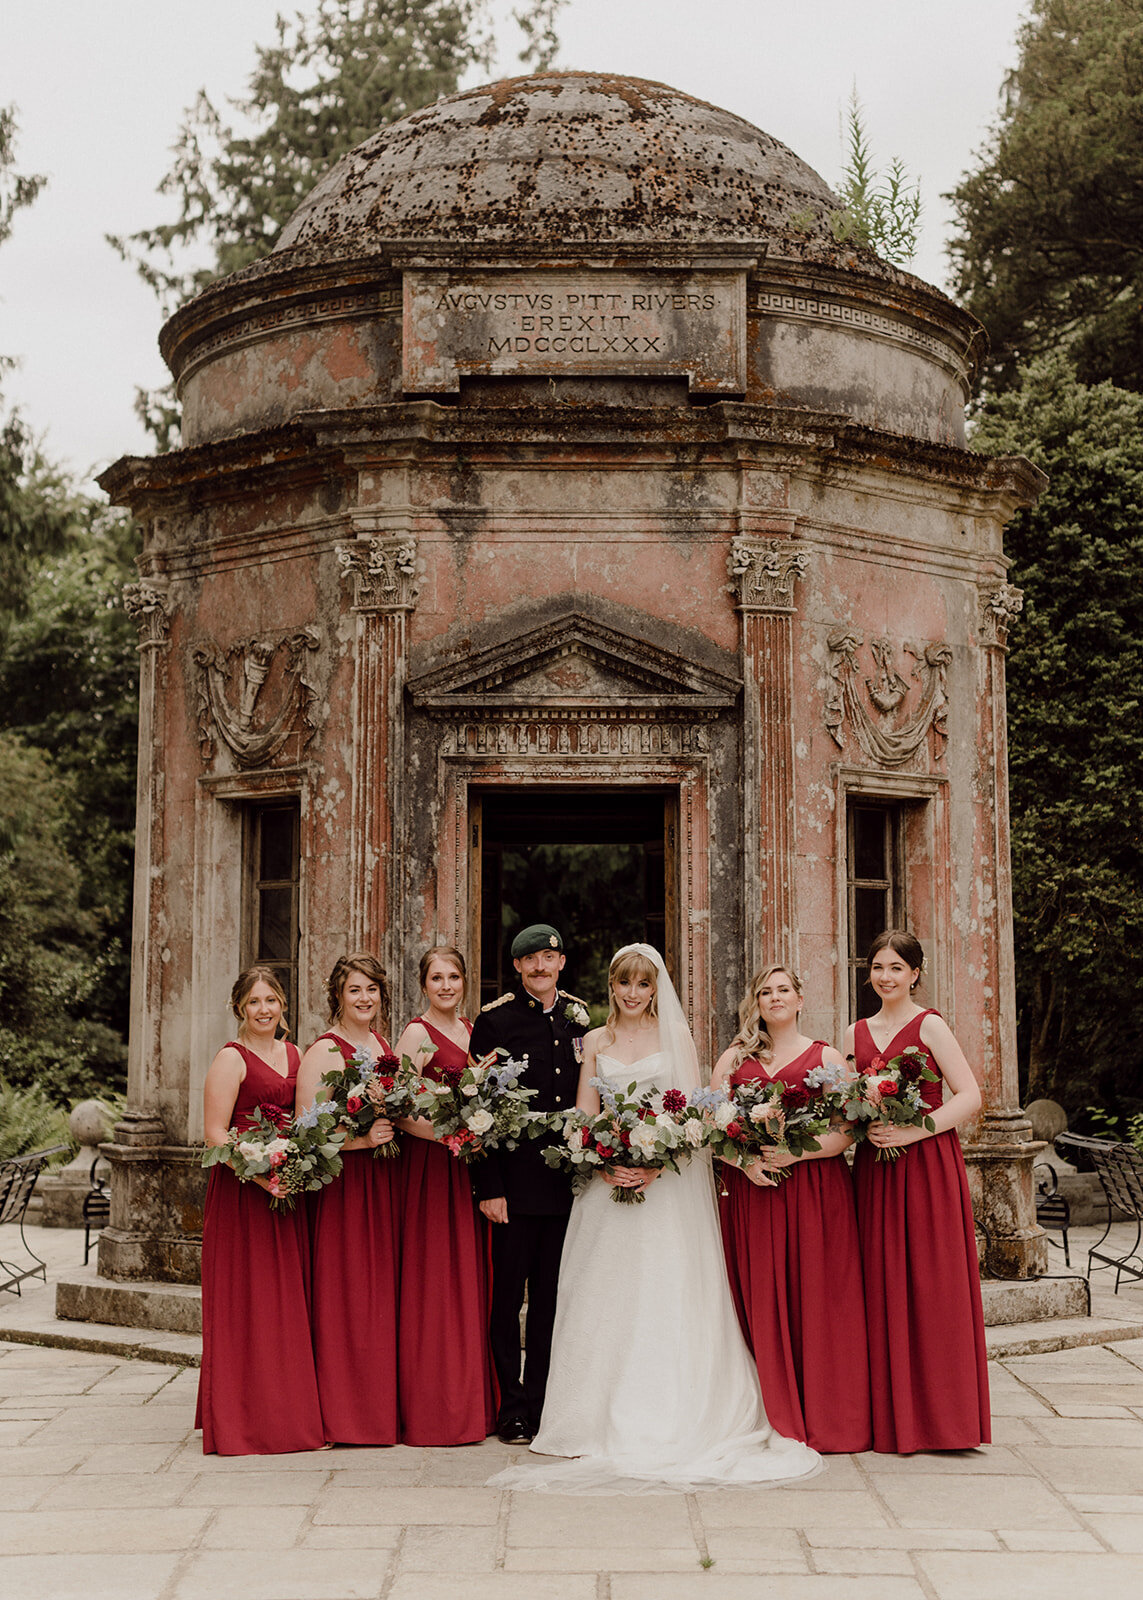 Bride with bridal party in red dresses